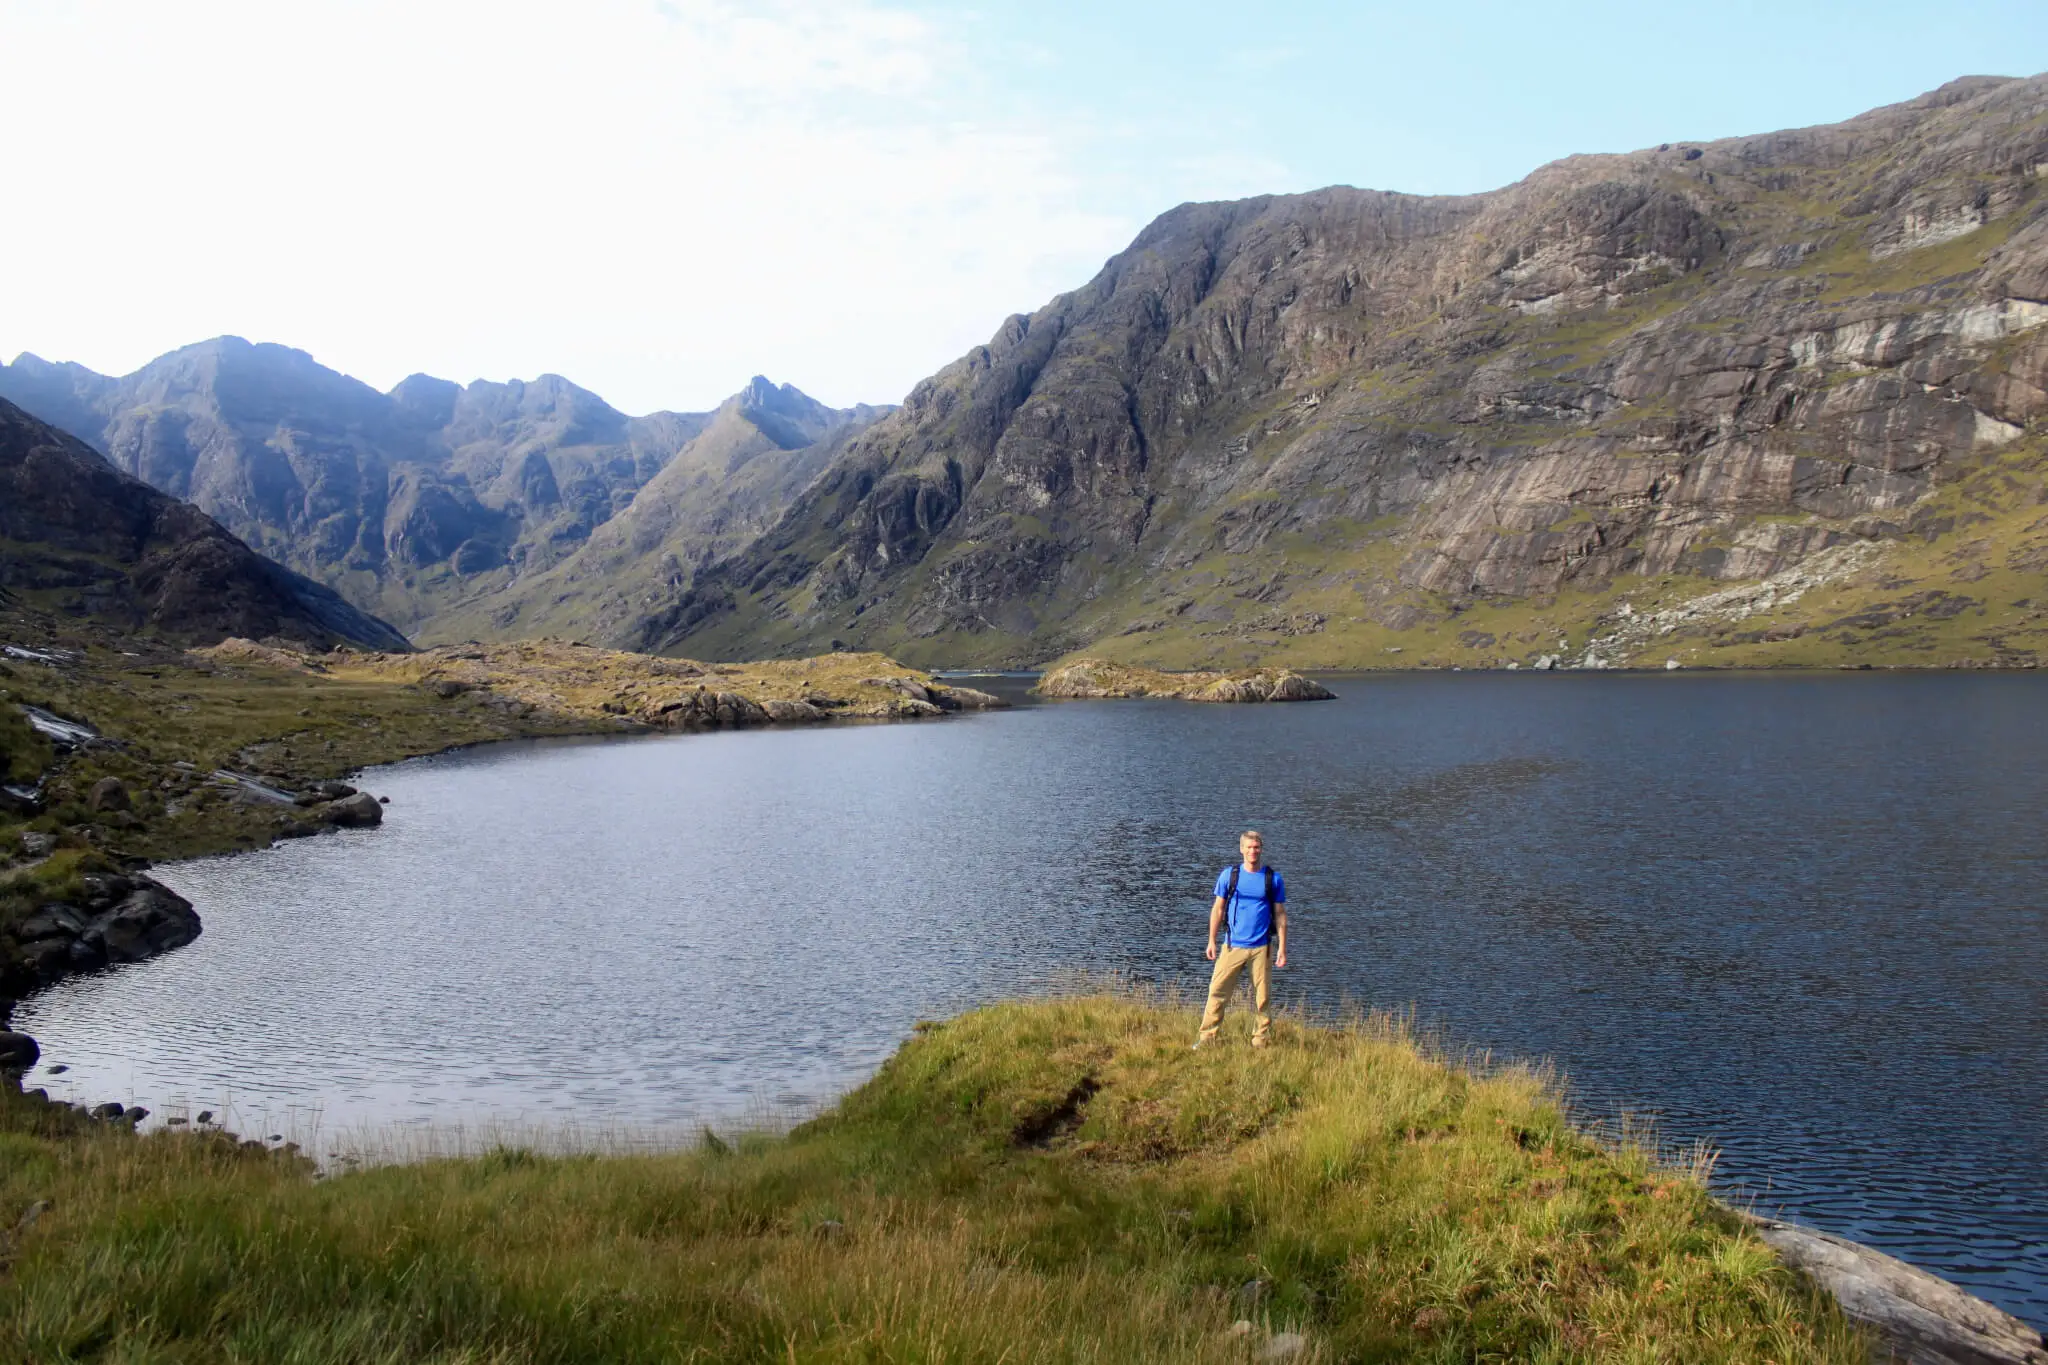 M standing in front of Loch Coruisk with mountains beyond